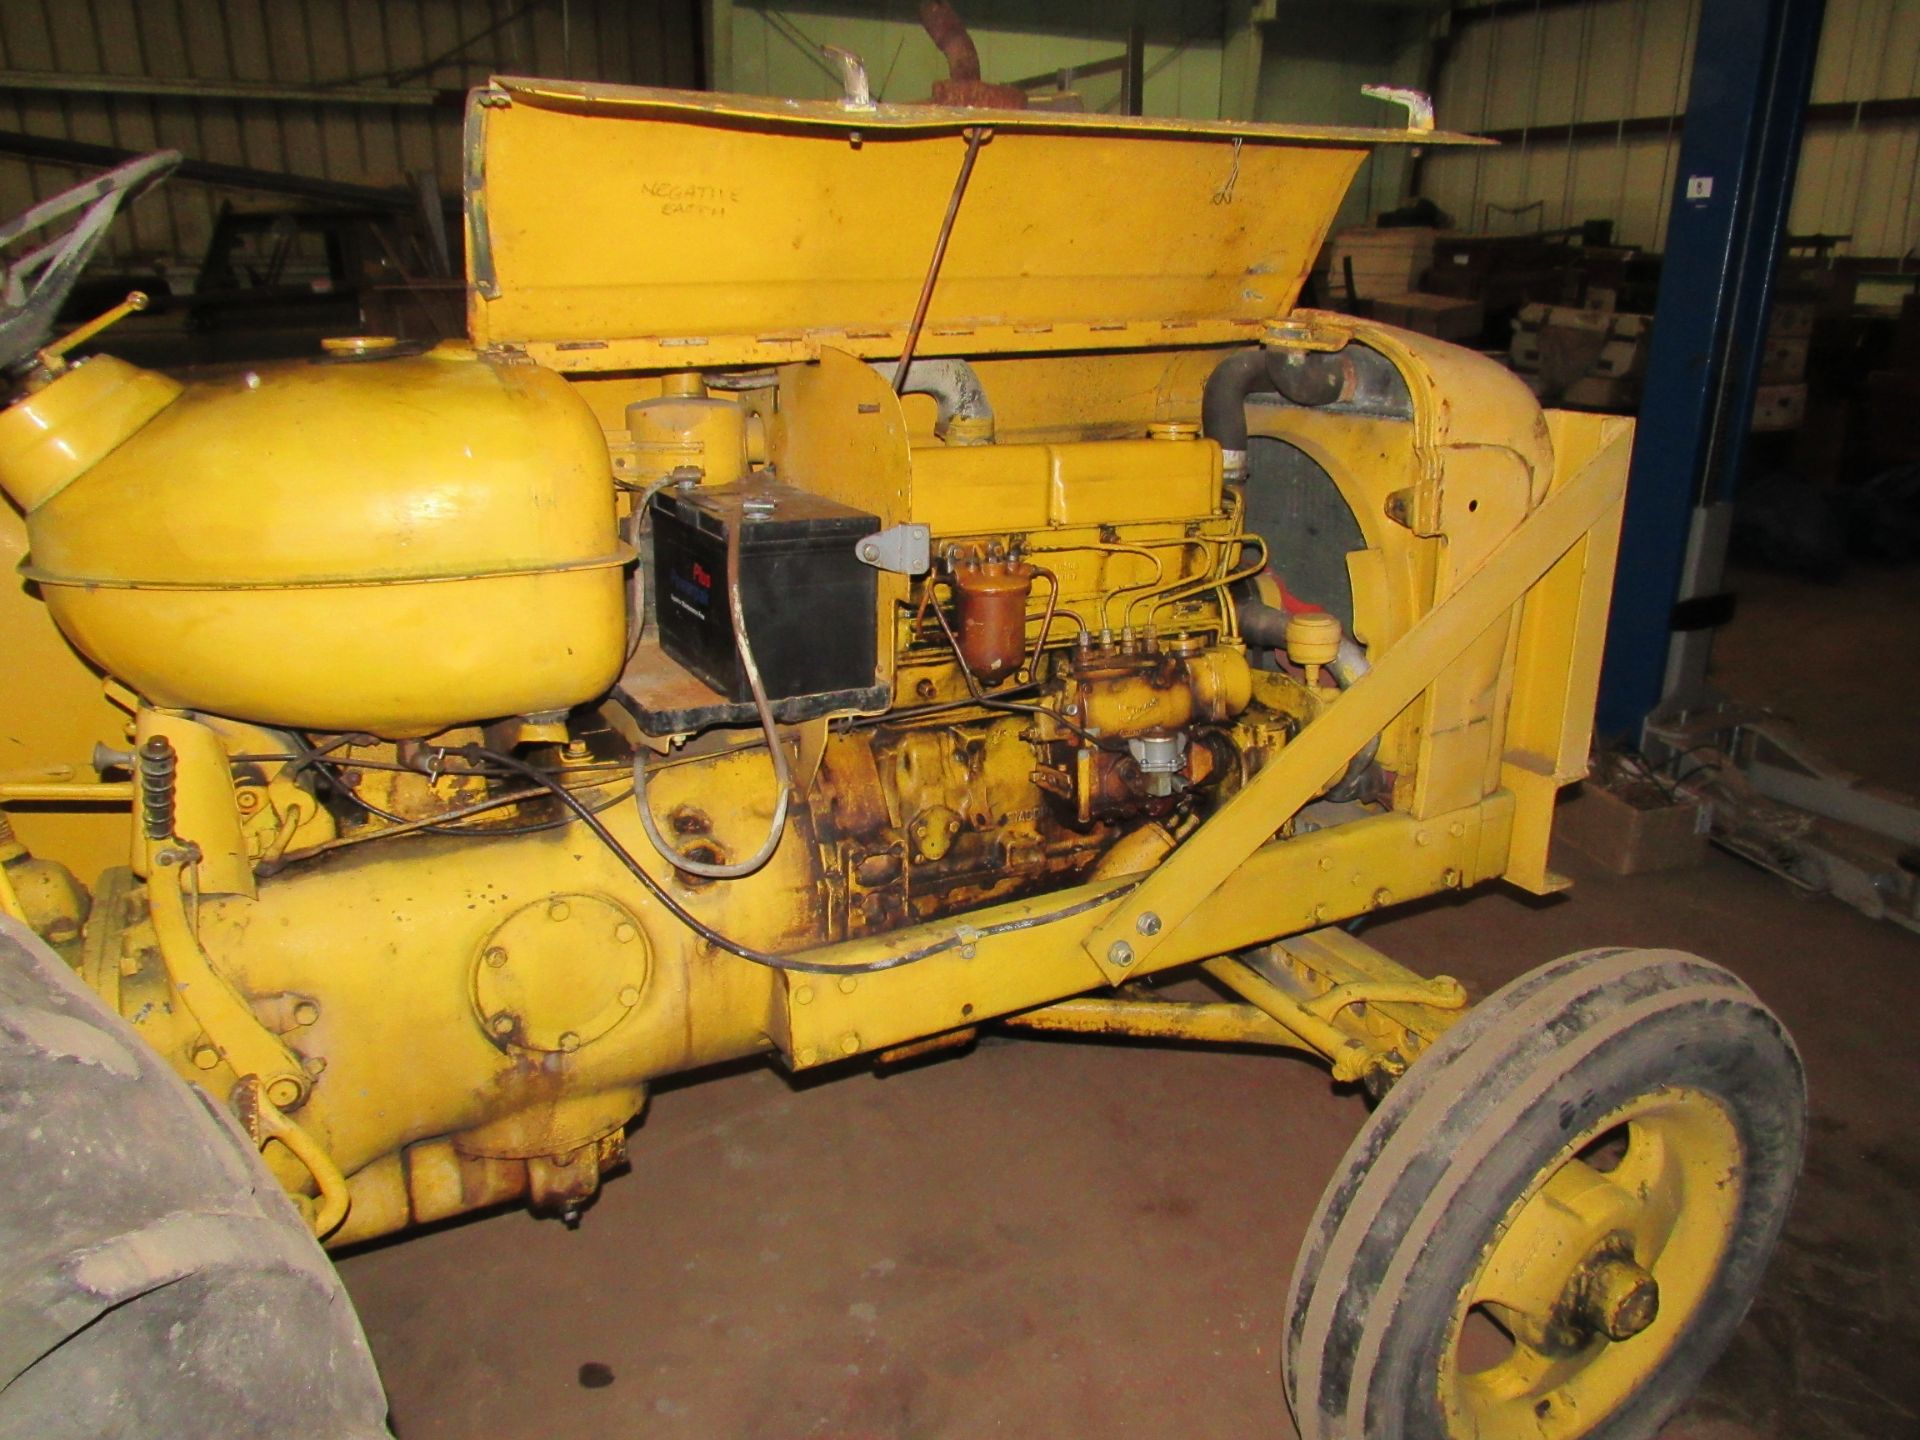 Fordson Power Major Industrial Vintage Tractor - Image 6 of 11